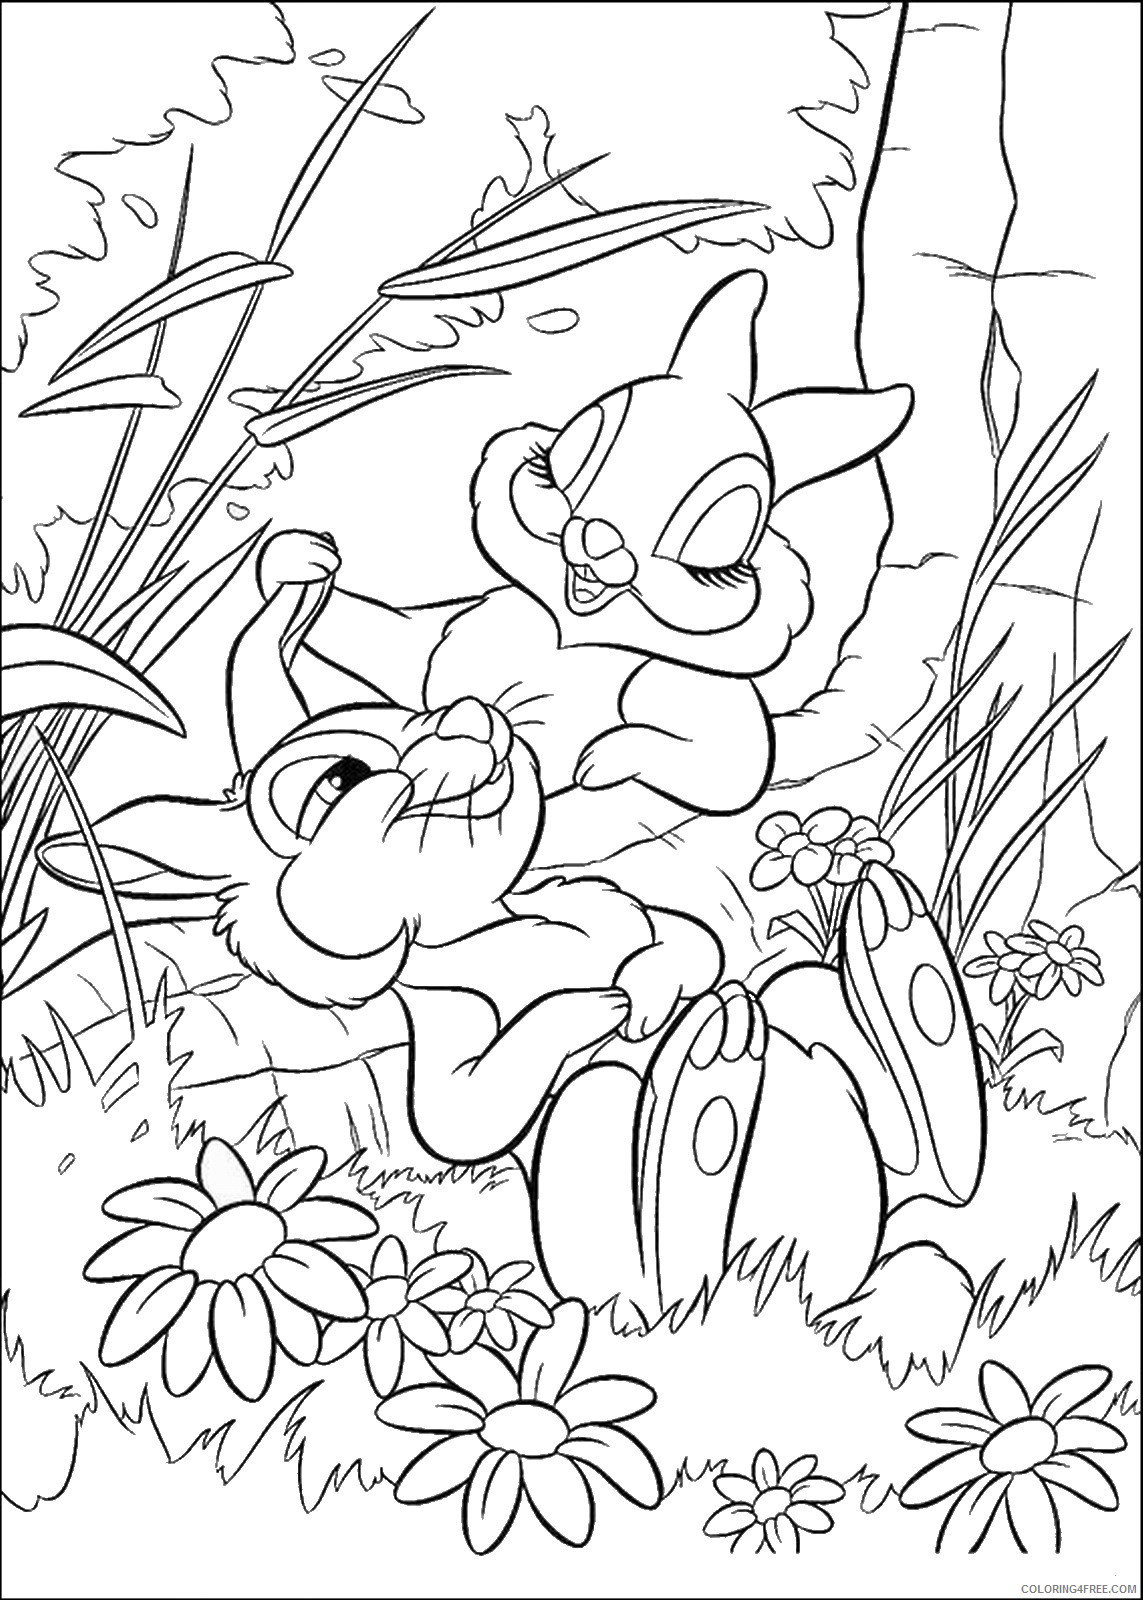 Bambi Coloring Pages Cartoons bambi_cl_31 Printable 2020 0957 Coloring4free